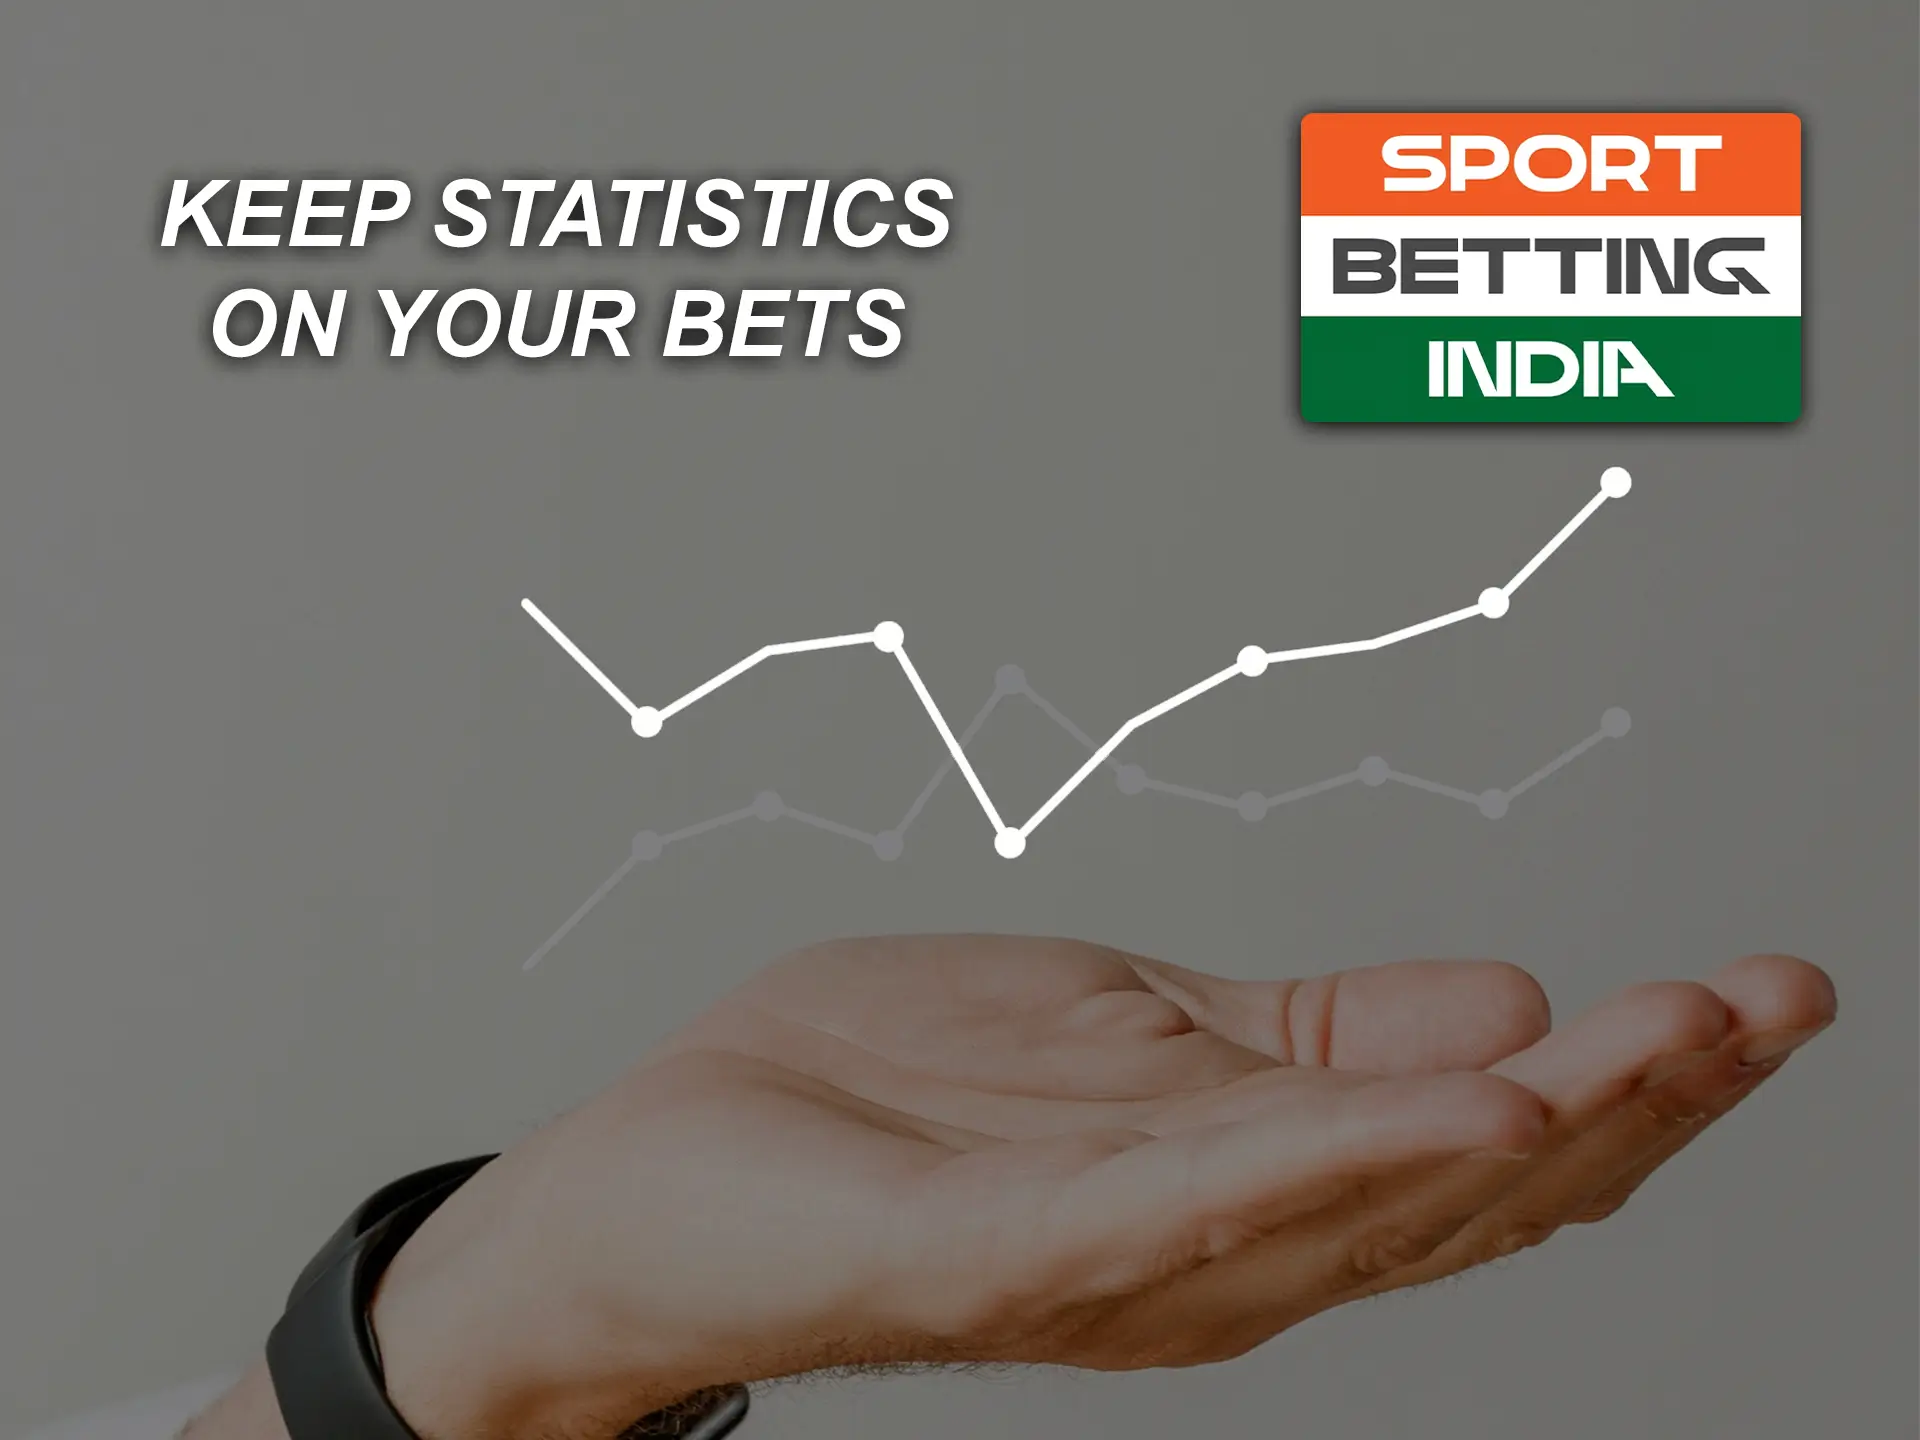 Keep an eye on your bets and allocate your funds wisely.